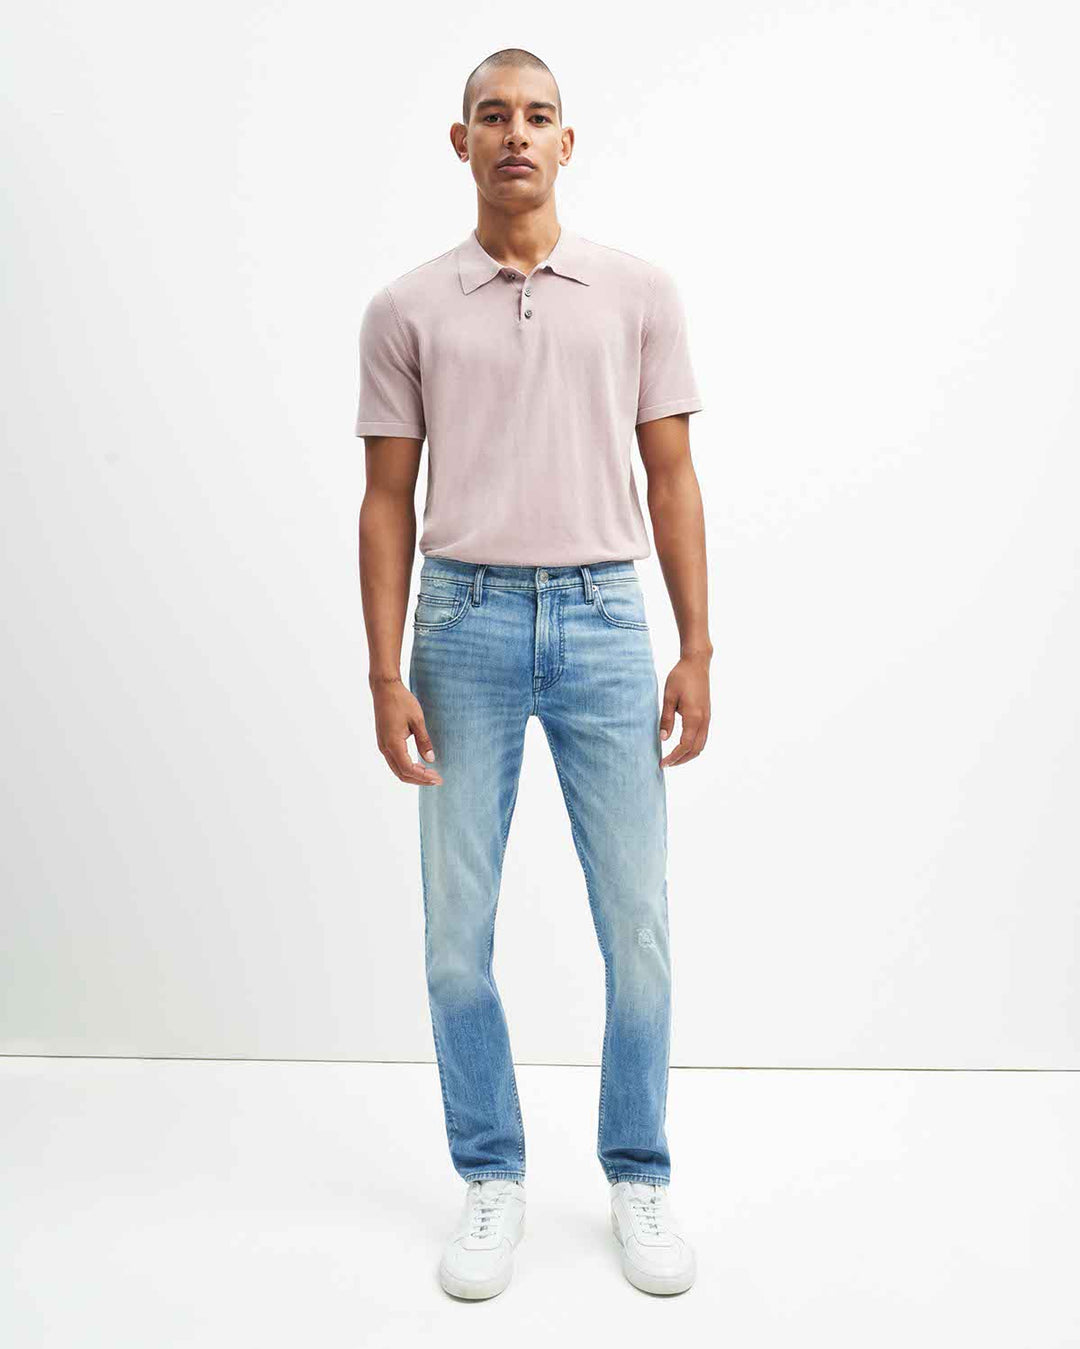 Seven Jeans, Seven 7 Jeans or Seven for All Mankind – Kitmeout Designer  Clothes – Fashion Blog & Fashion Forum.